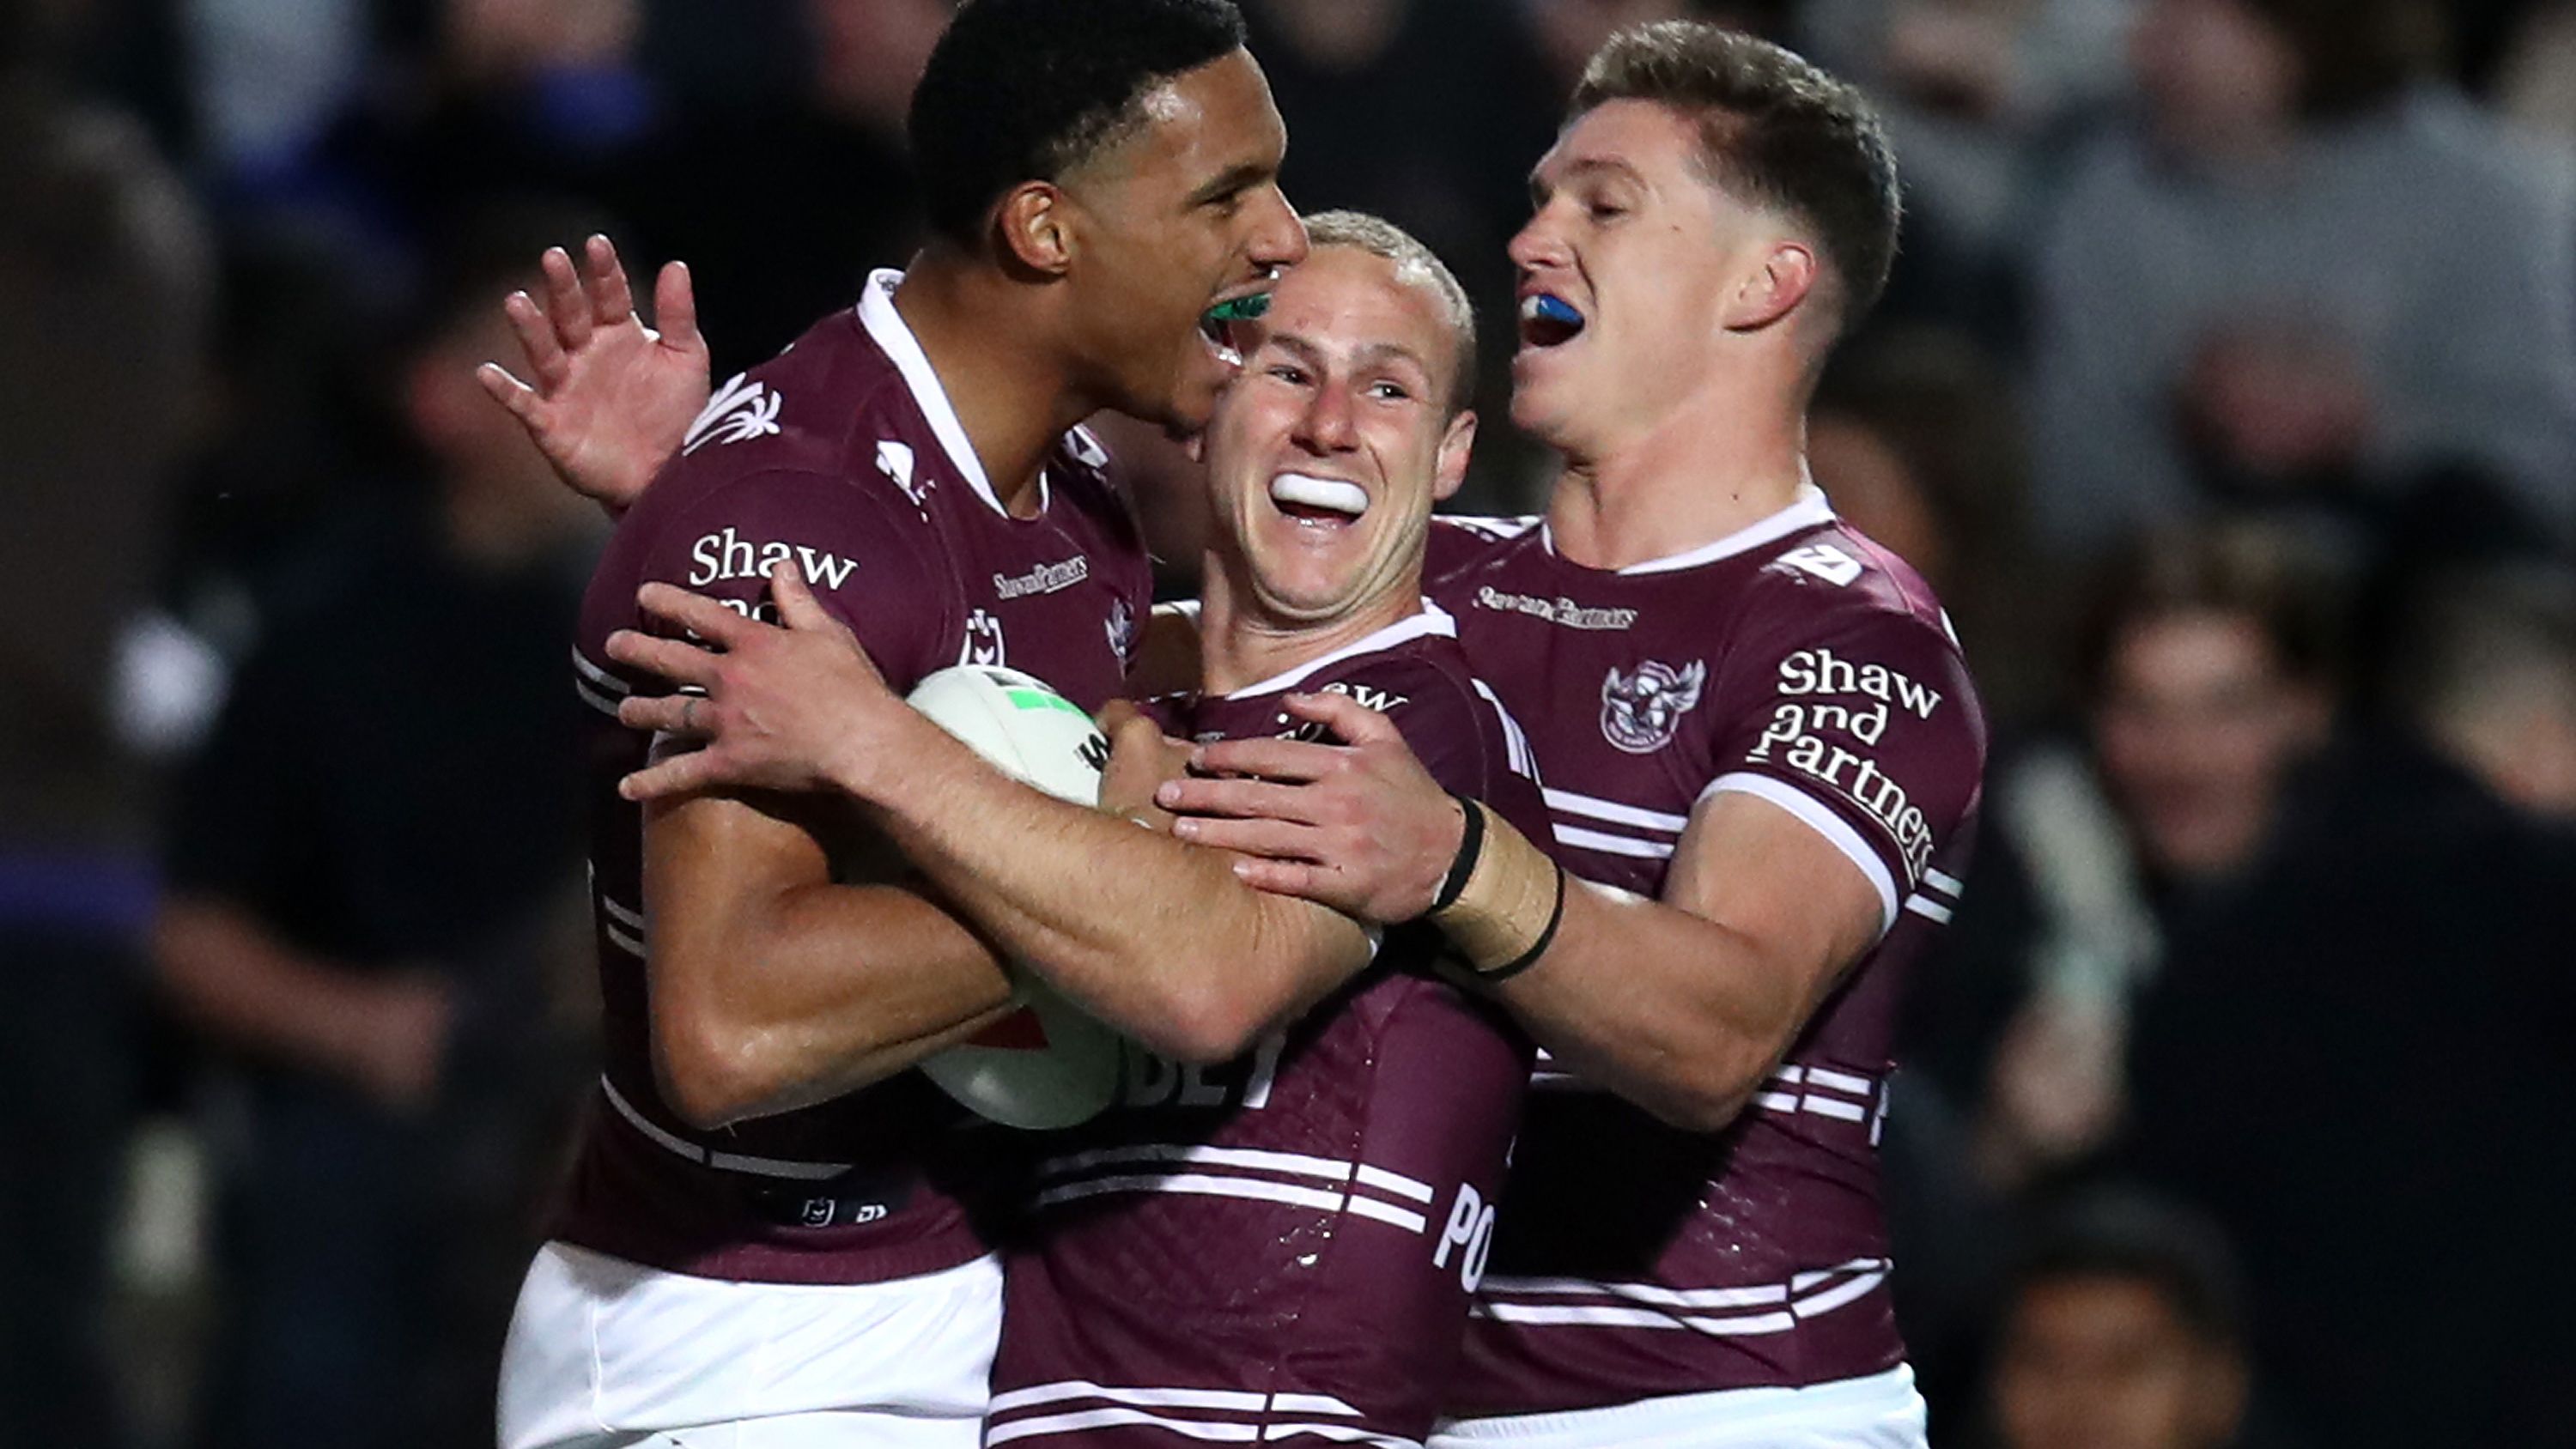 Jason Saab of the Sea Eagles celebrates with team mates after scoring a try during the round 15 NRL match between Manly Sea Eagles and Dolphins at 4 Pines Park on June 09, 2023 in Sydney, Australia. (Photo by Jason McCawley/Getty Images)